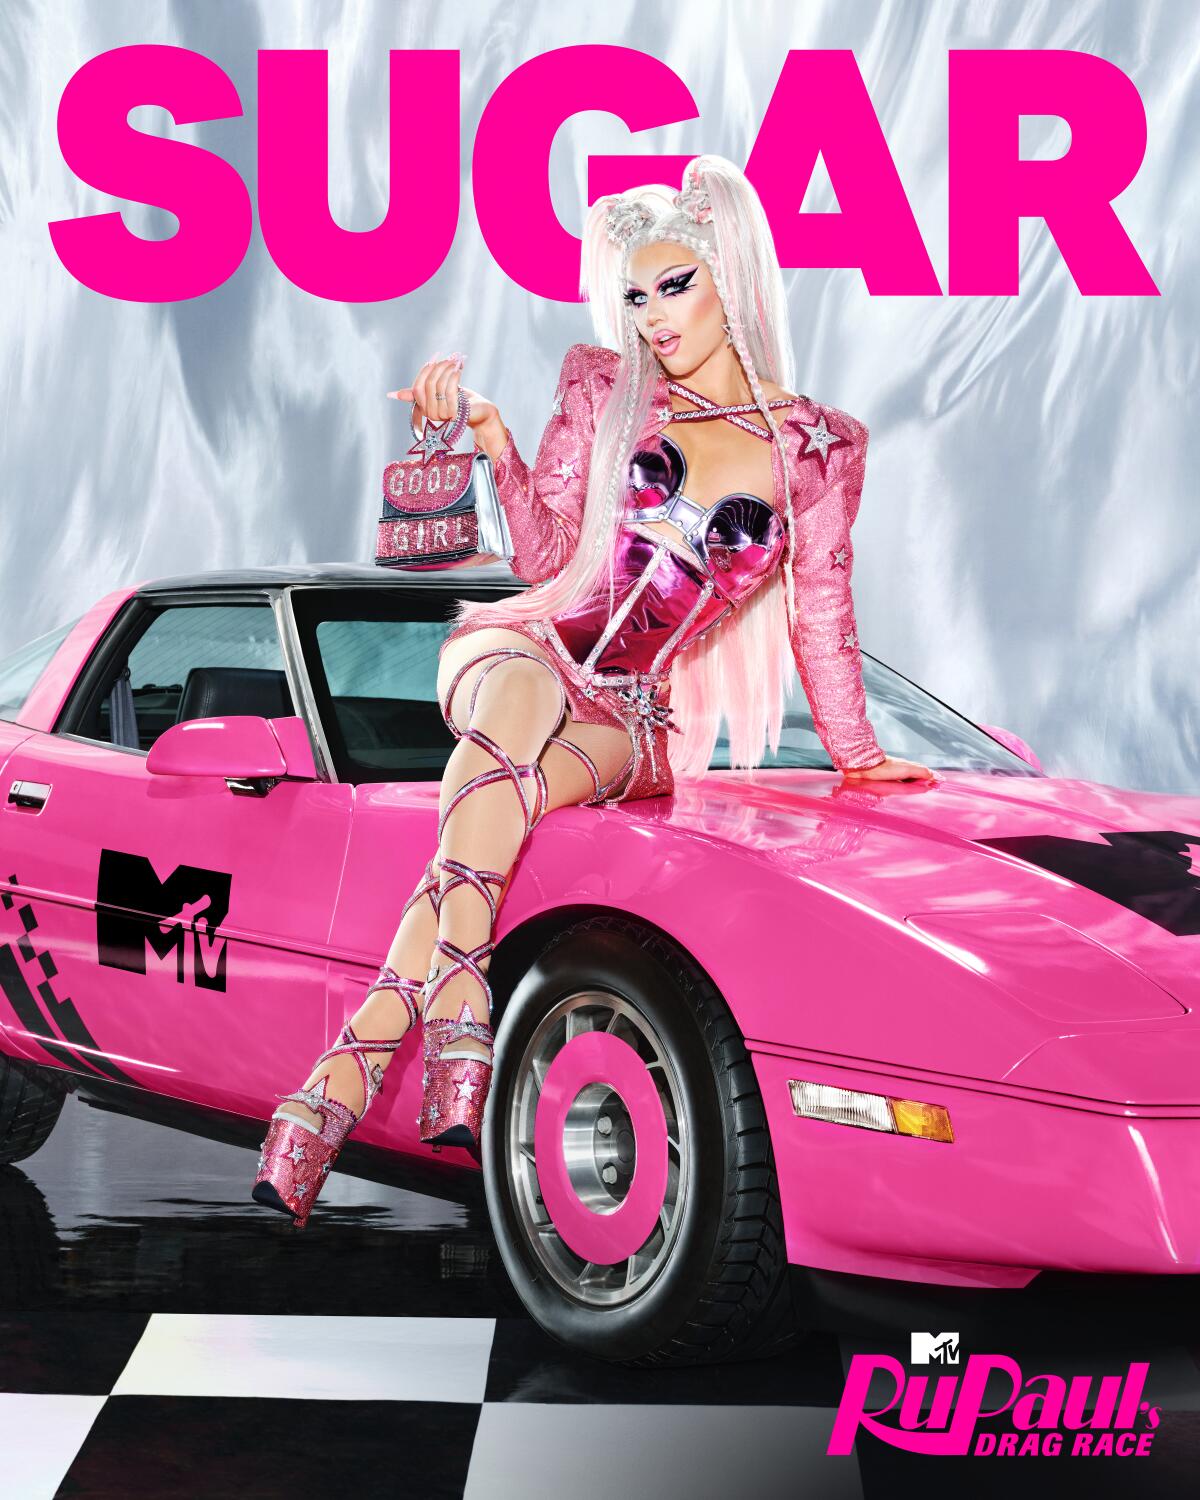 A platinum blond in a metallic pink outfit sits on a hot pink car holding a purse in one hand